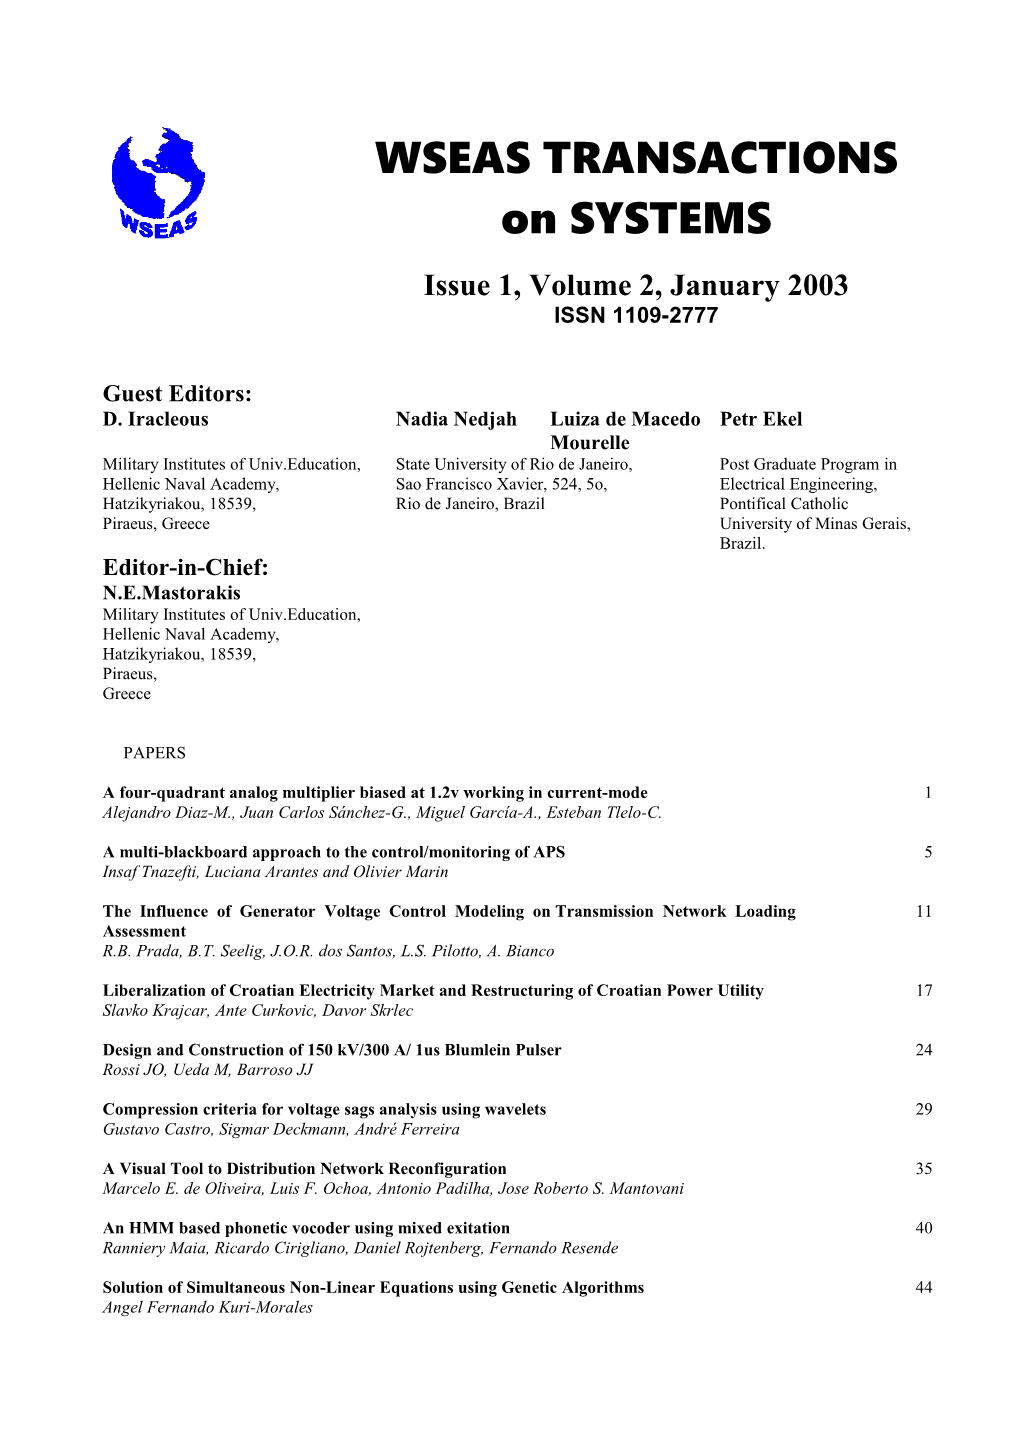 WSEAS Trans. on SYSTEMS, January 2003